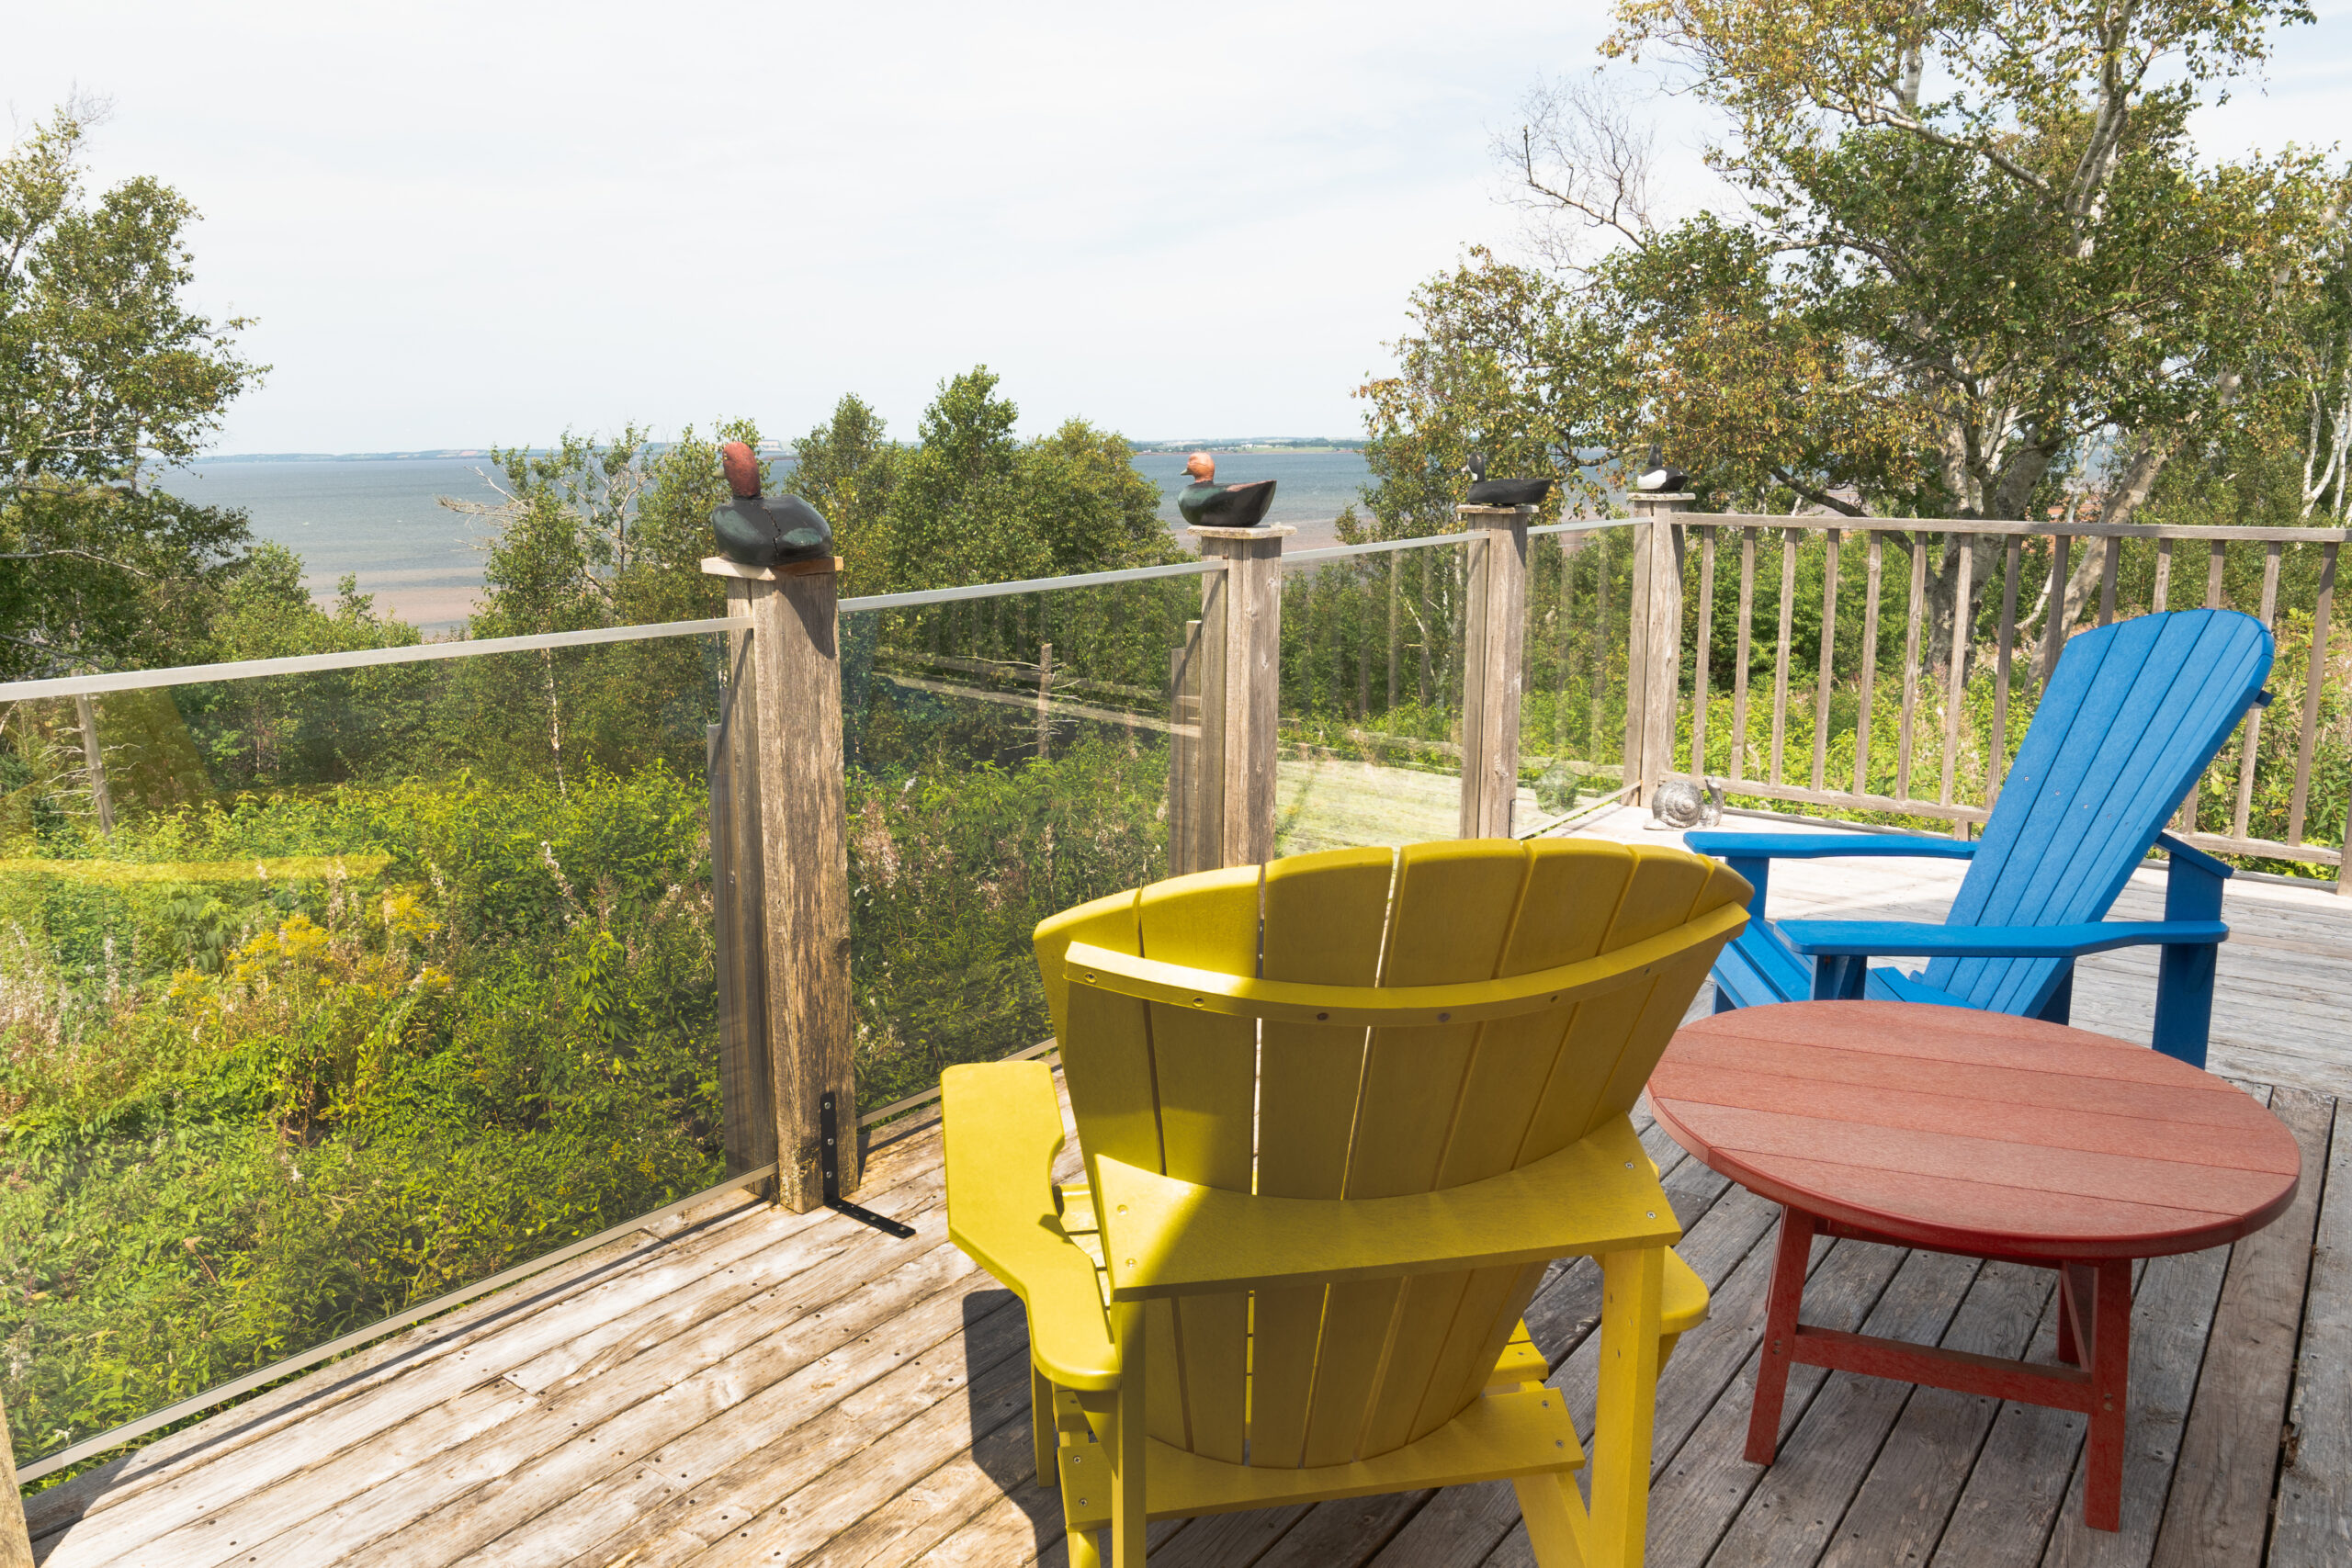 Blue and yellow Muskoka-style chairs sit on a small deck, looking out toward the water.